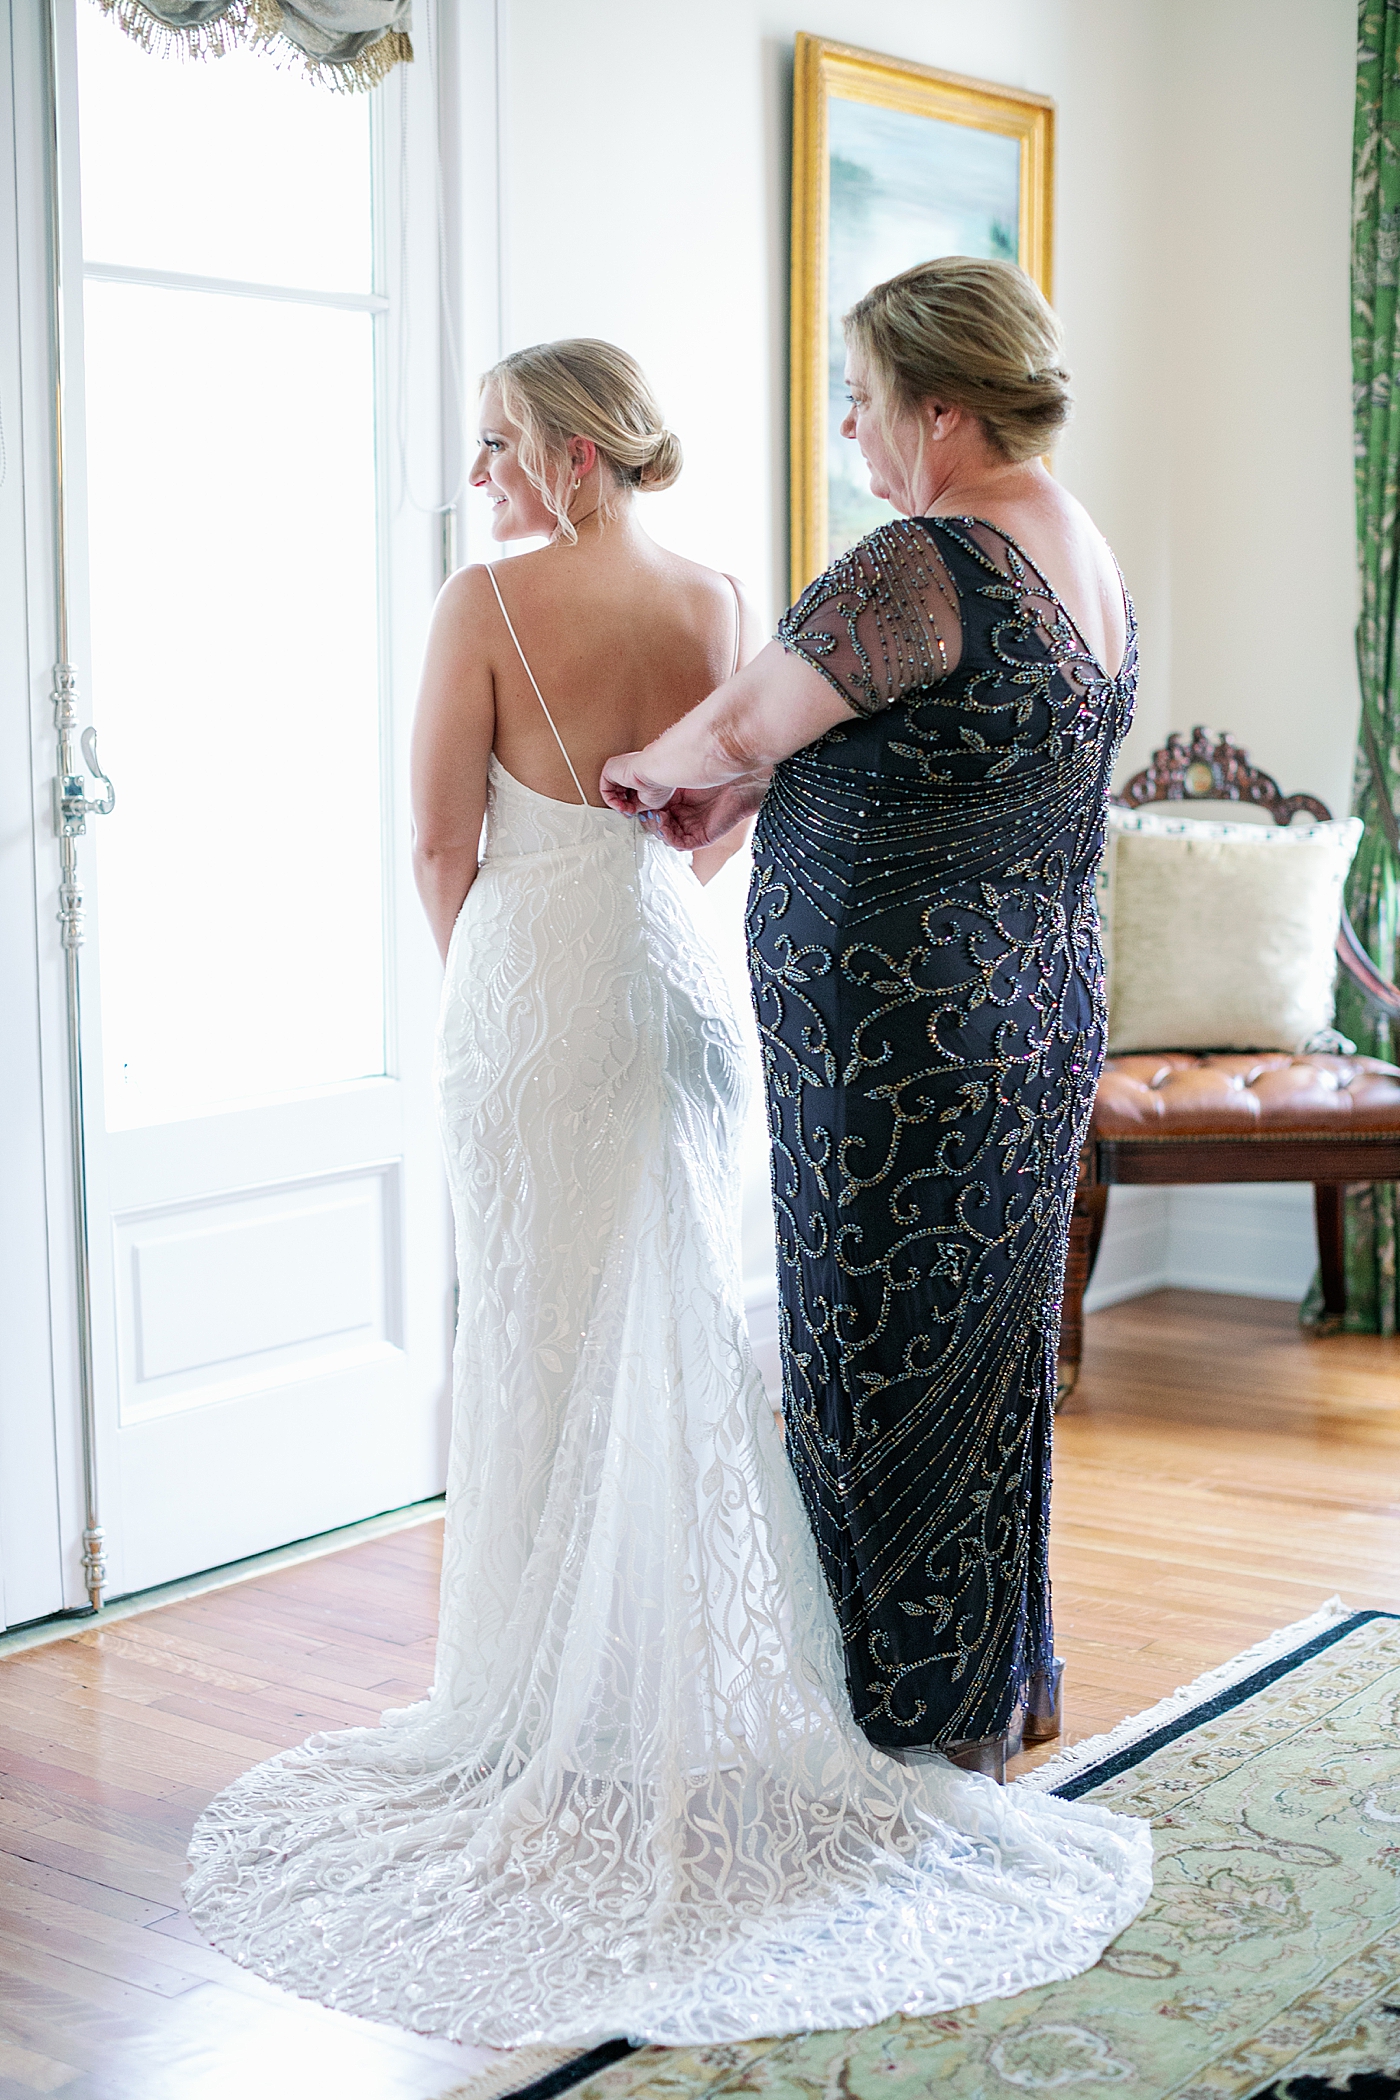 Bride being helped into her dress | Images by Annie Laura Photography